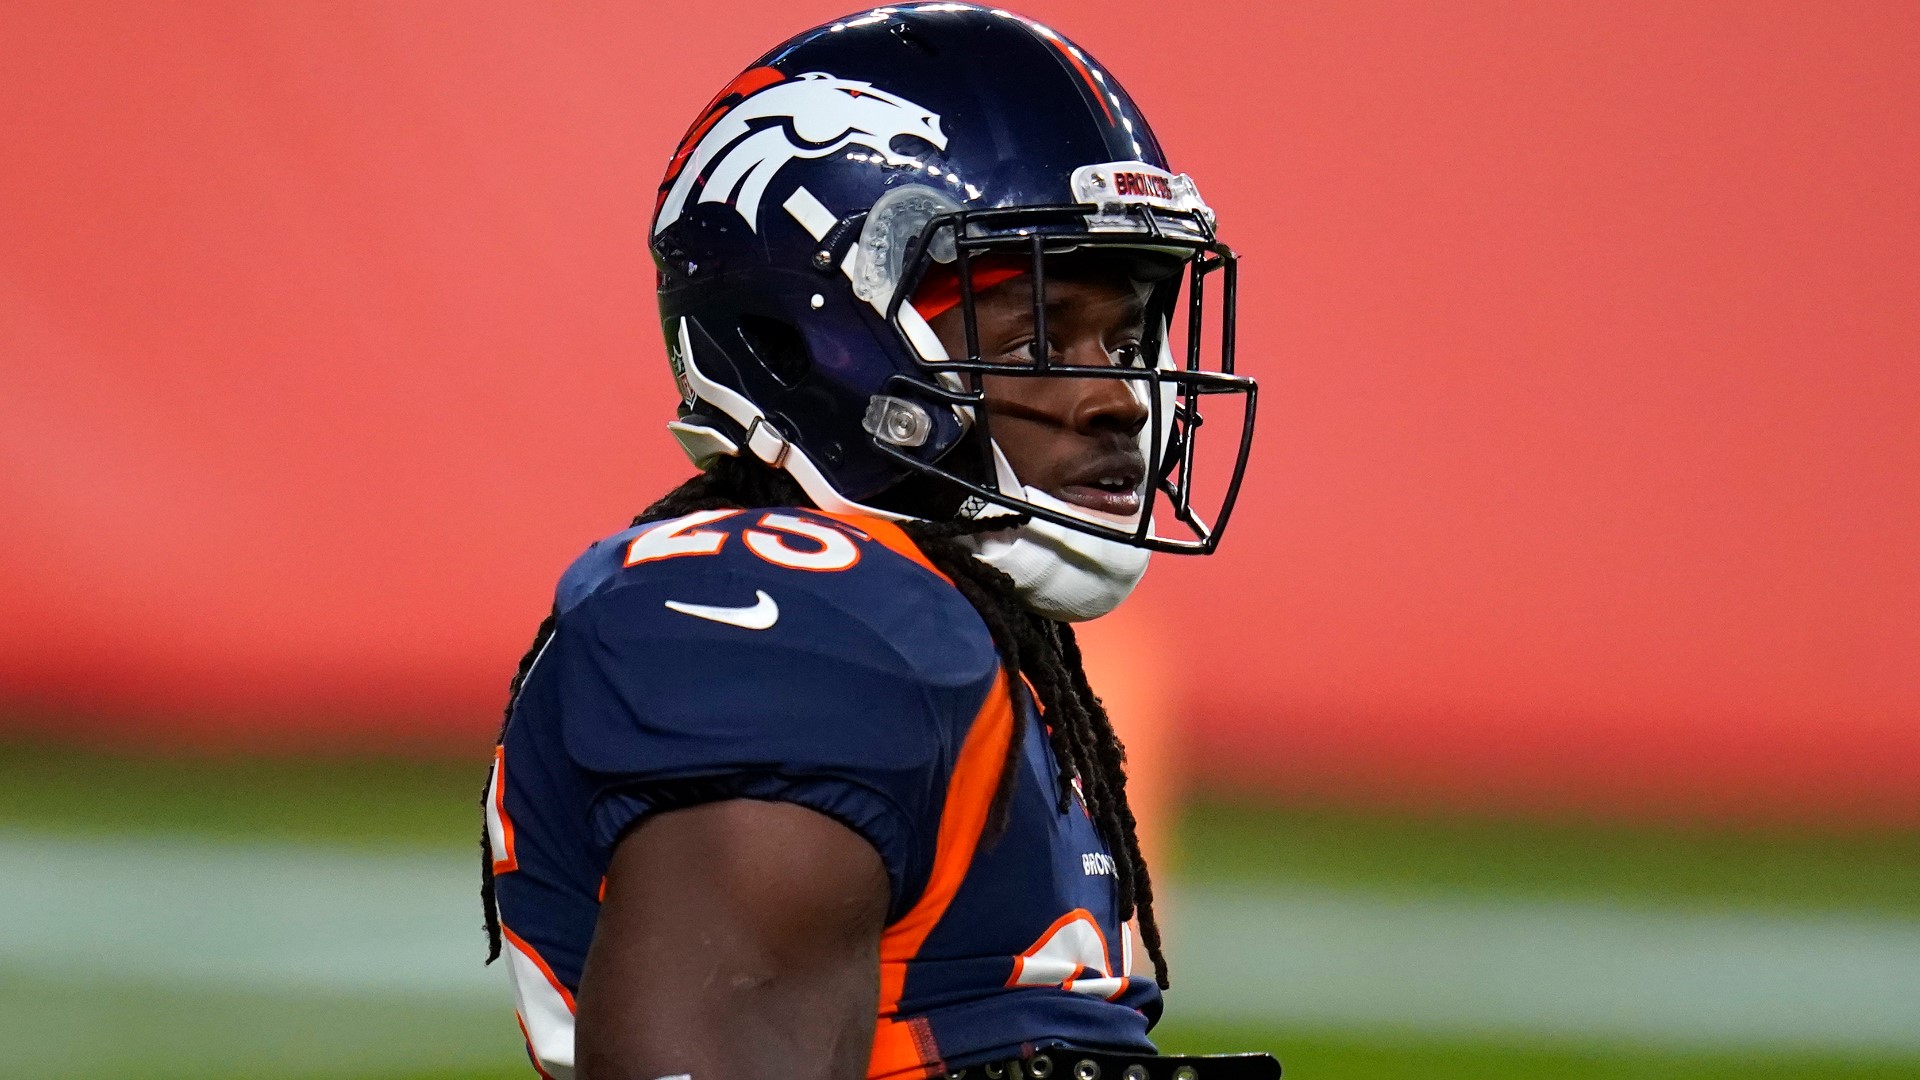 The running back, coming off his first 100-yard game with the Broncos, also received a speeding charge of going at least 25 mph over the limit.